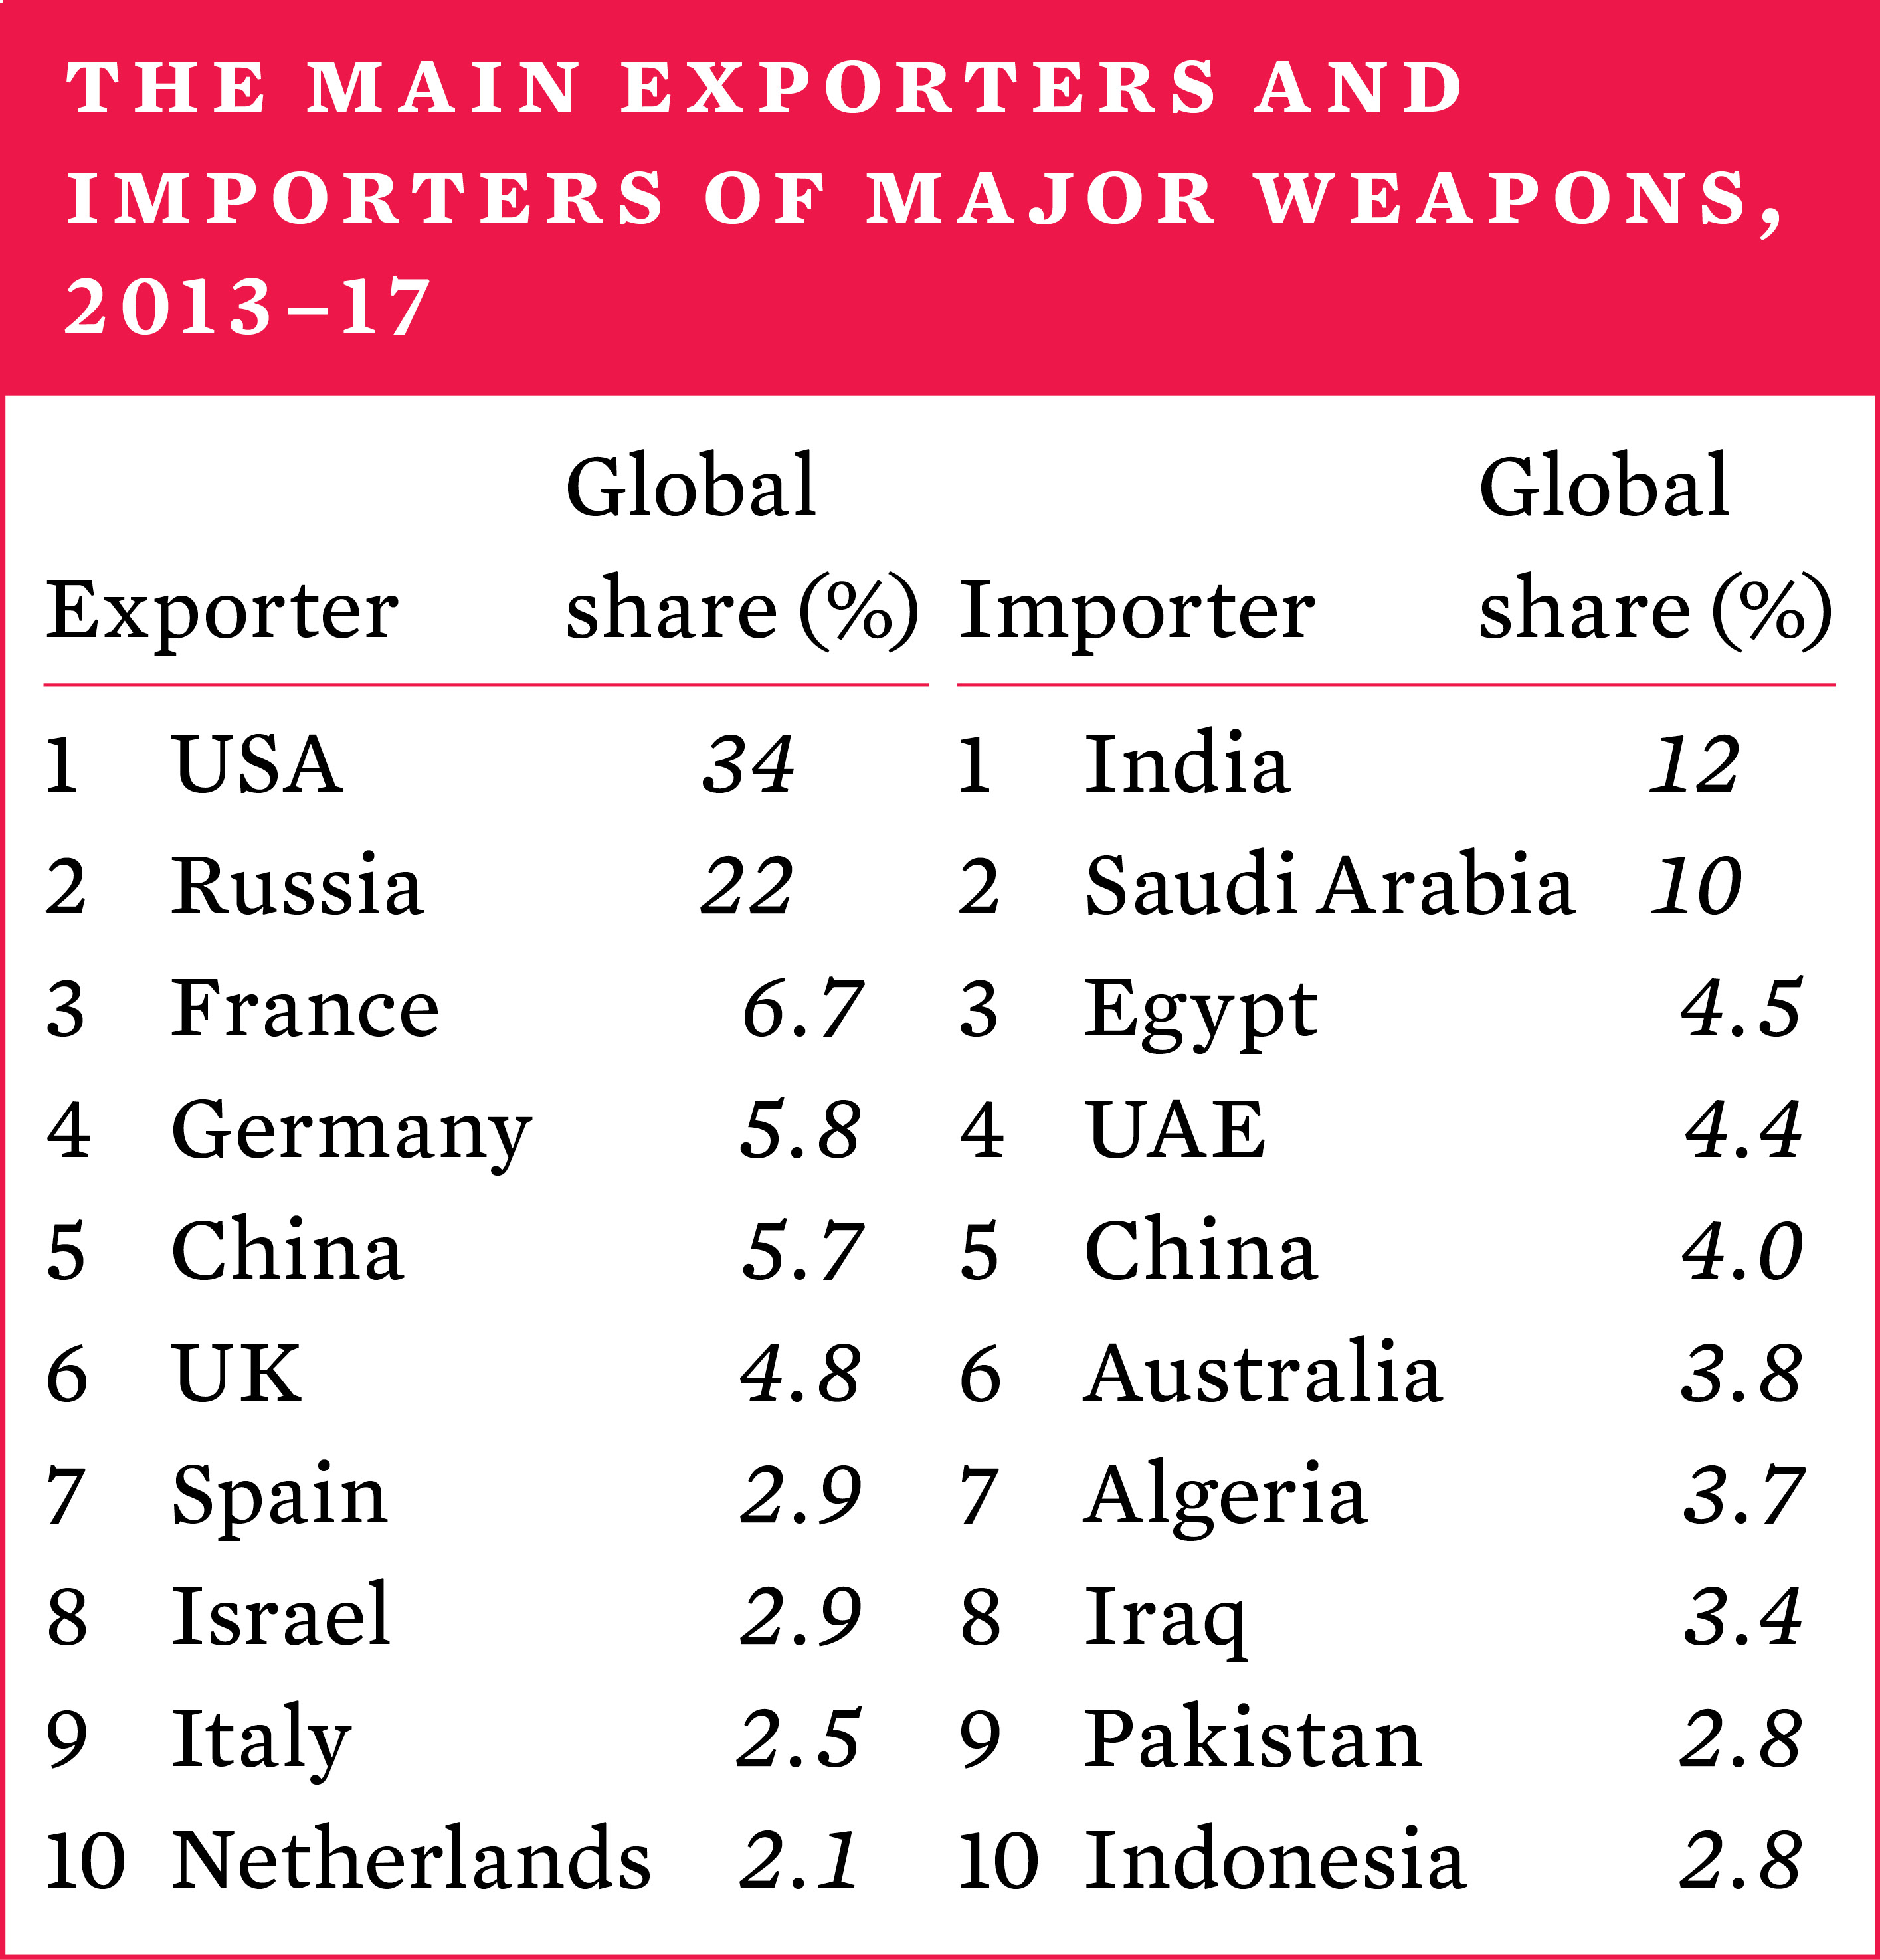 The main exporters and importers of major weapons, 2013-17